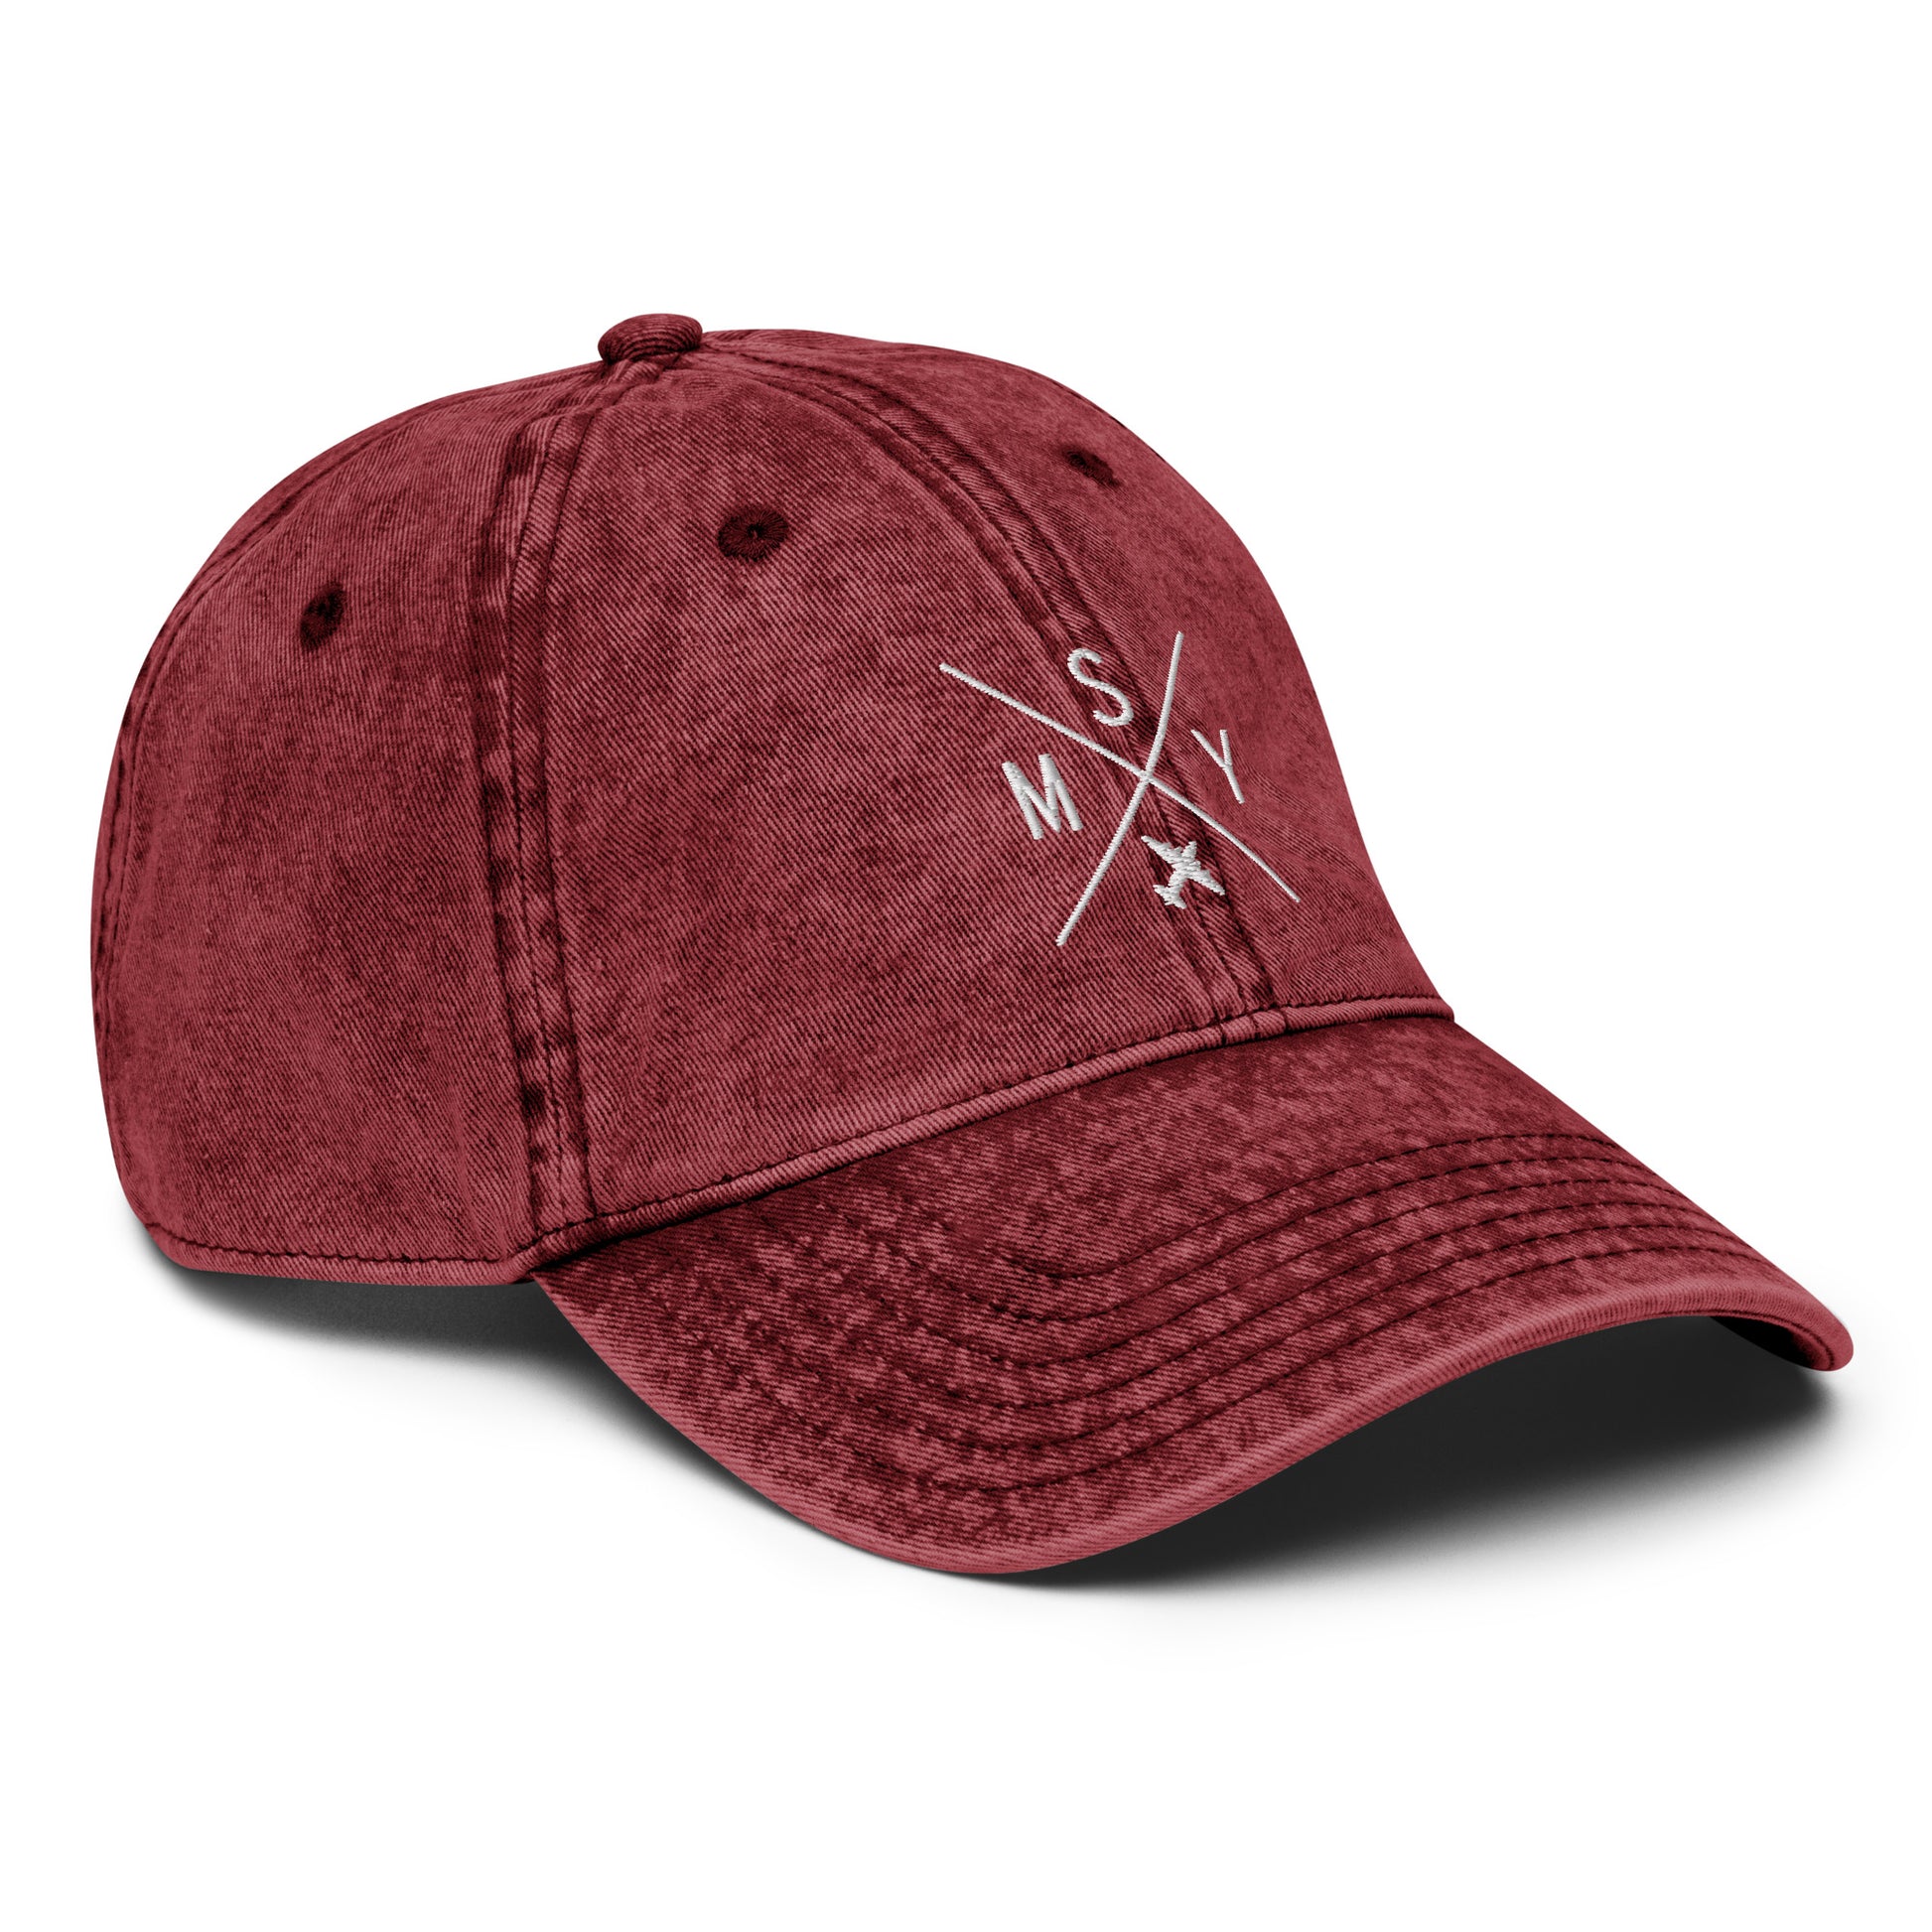 Crossed-X Cotton Twill Cap - White • MSY New Orleans • YHM Designs - Image 24